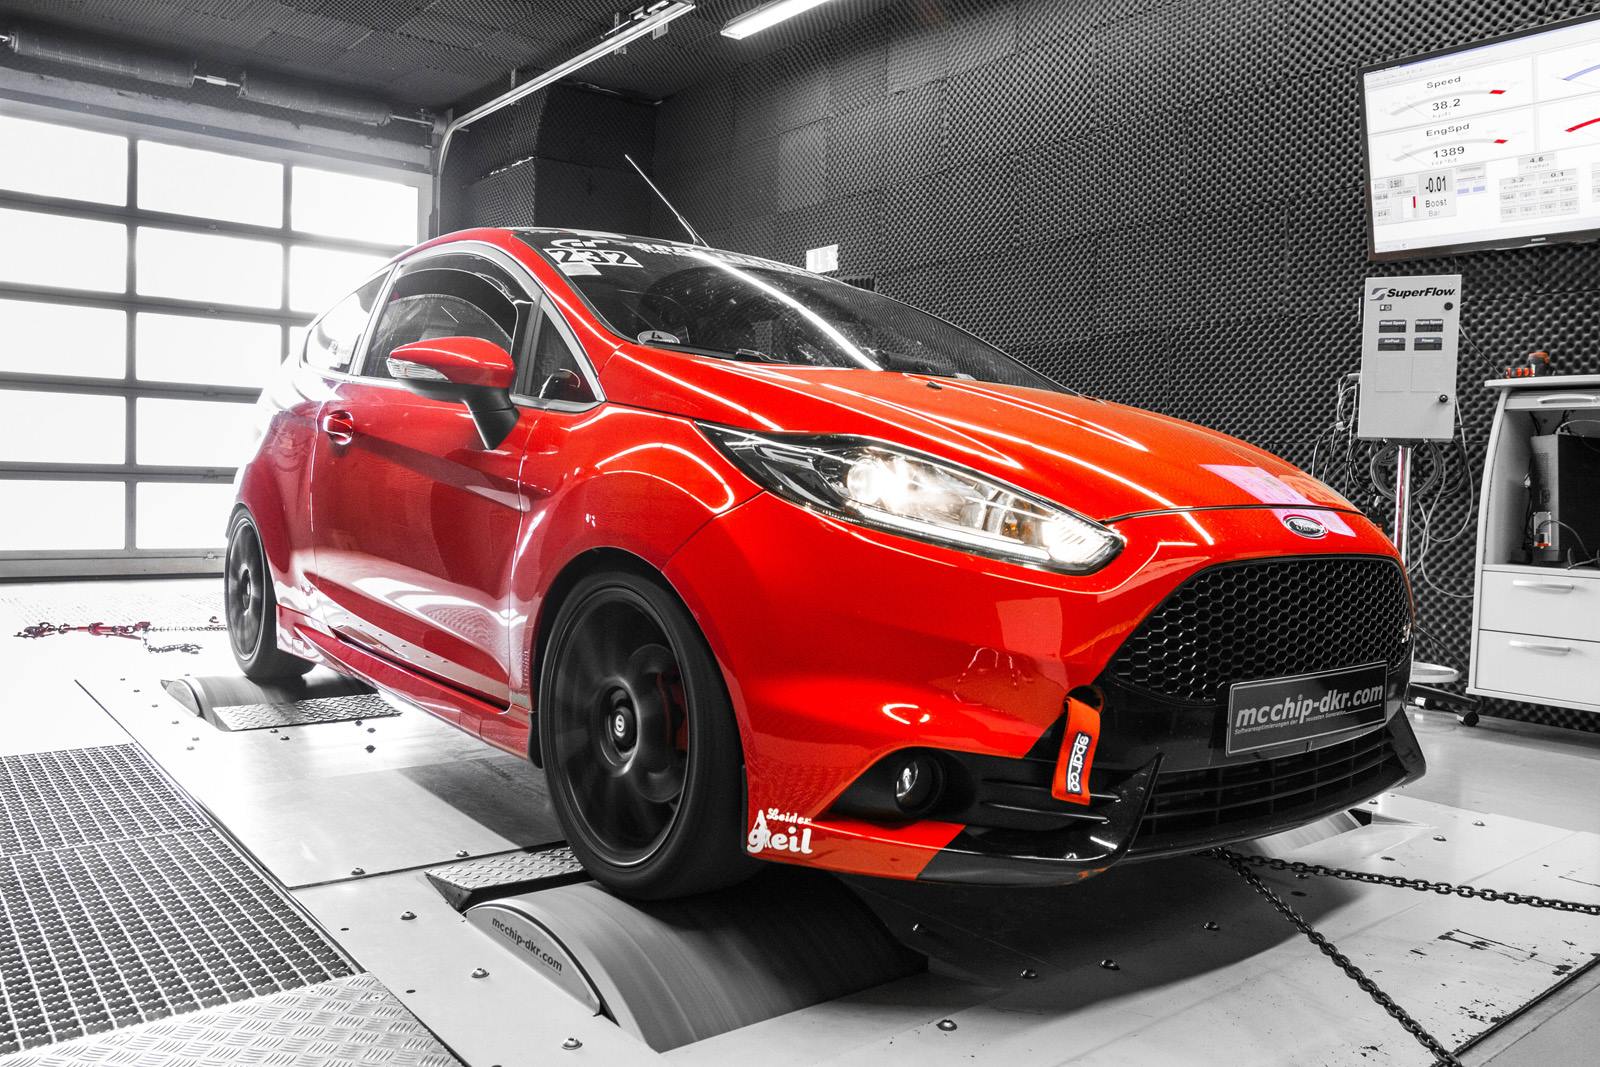 Ford Fiesta St 1 6 Liter Turbo Tuned To 266 Hp And 387 Nm Of Torque Autoevolution